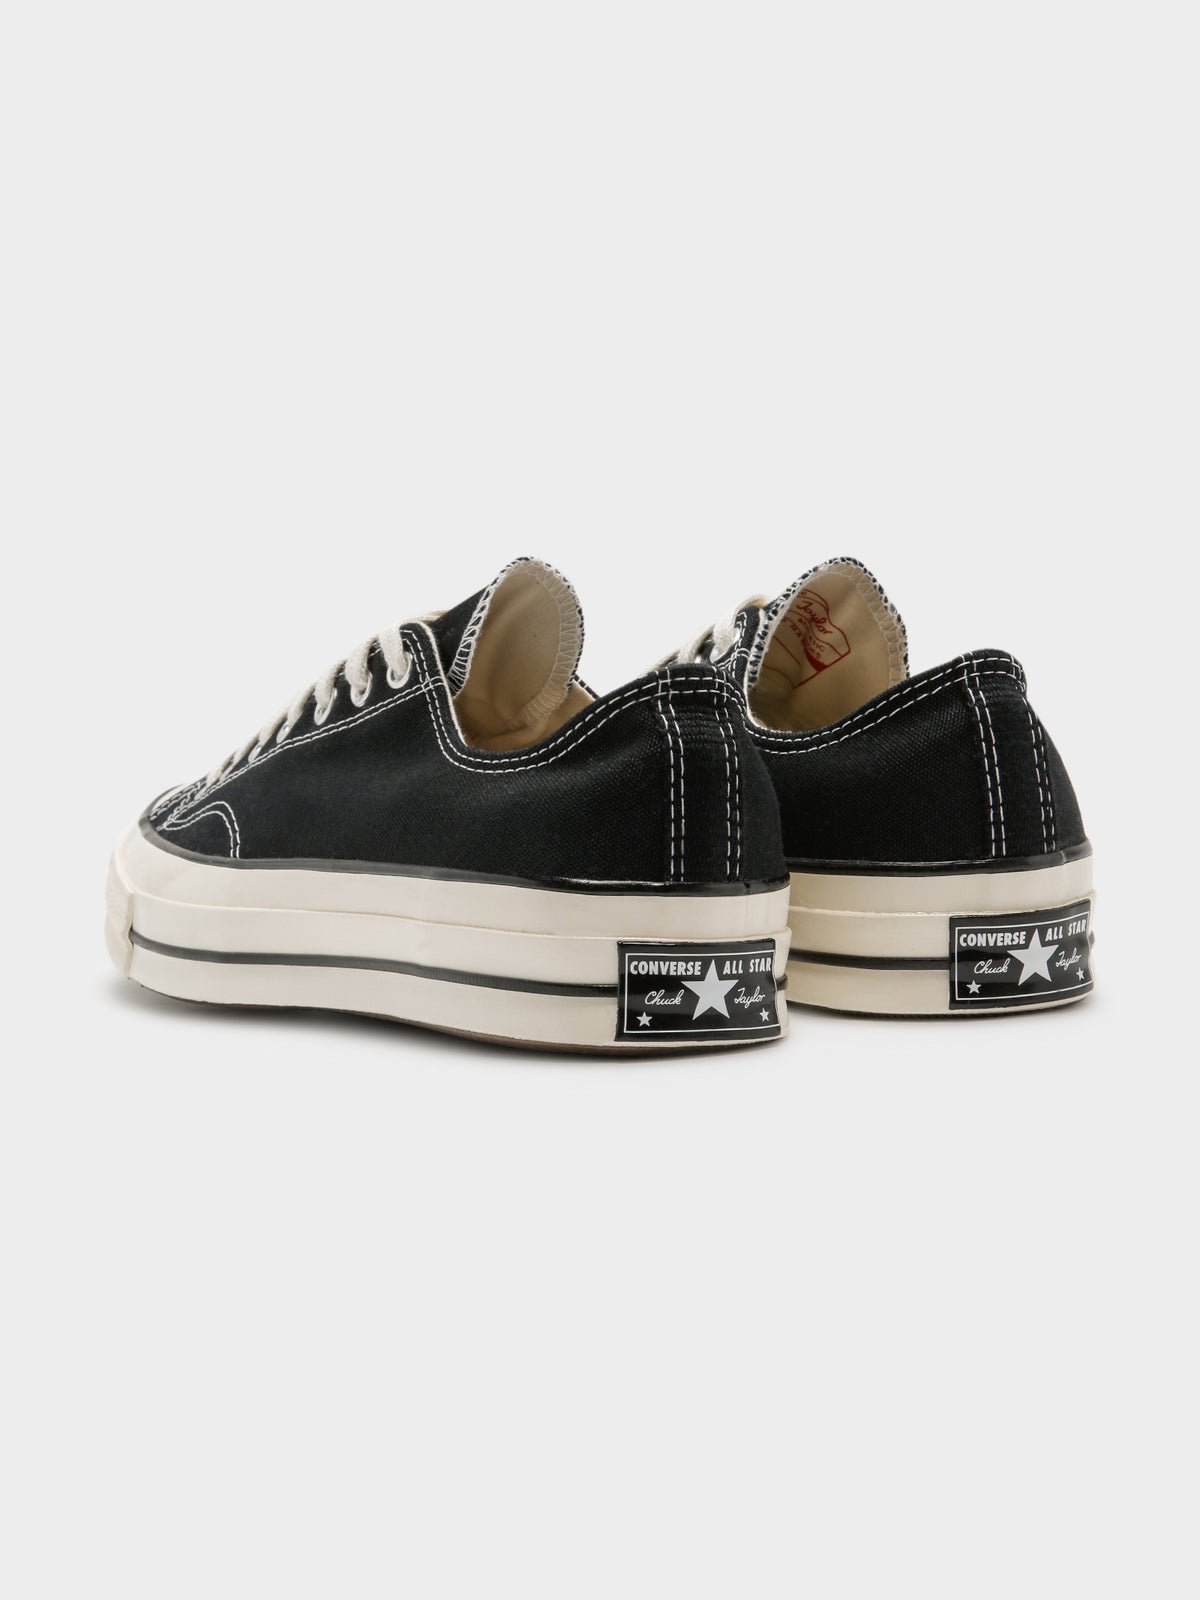 Unisex Chuck Taylor All Star 70 Low Top Sneakers in Black